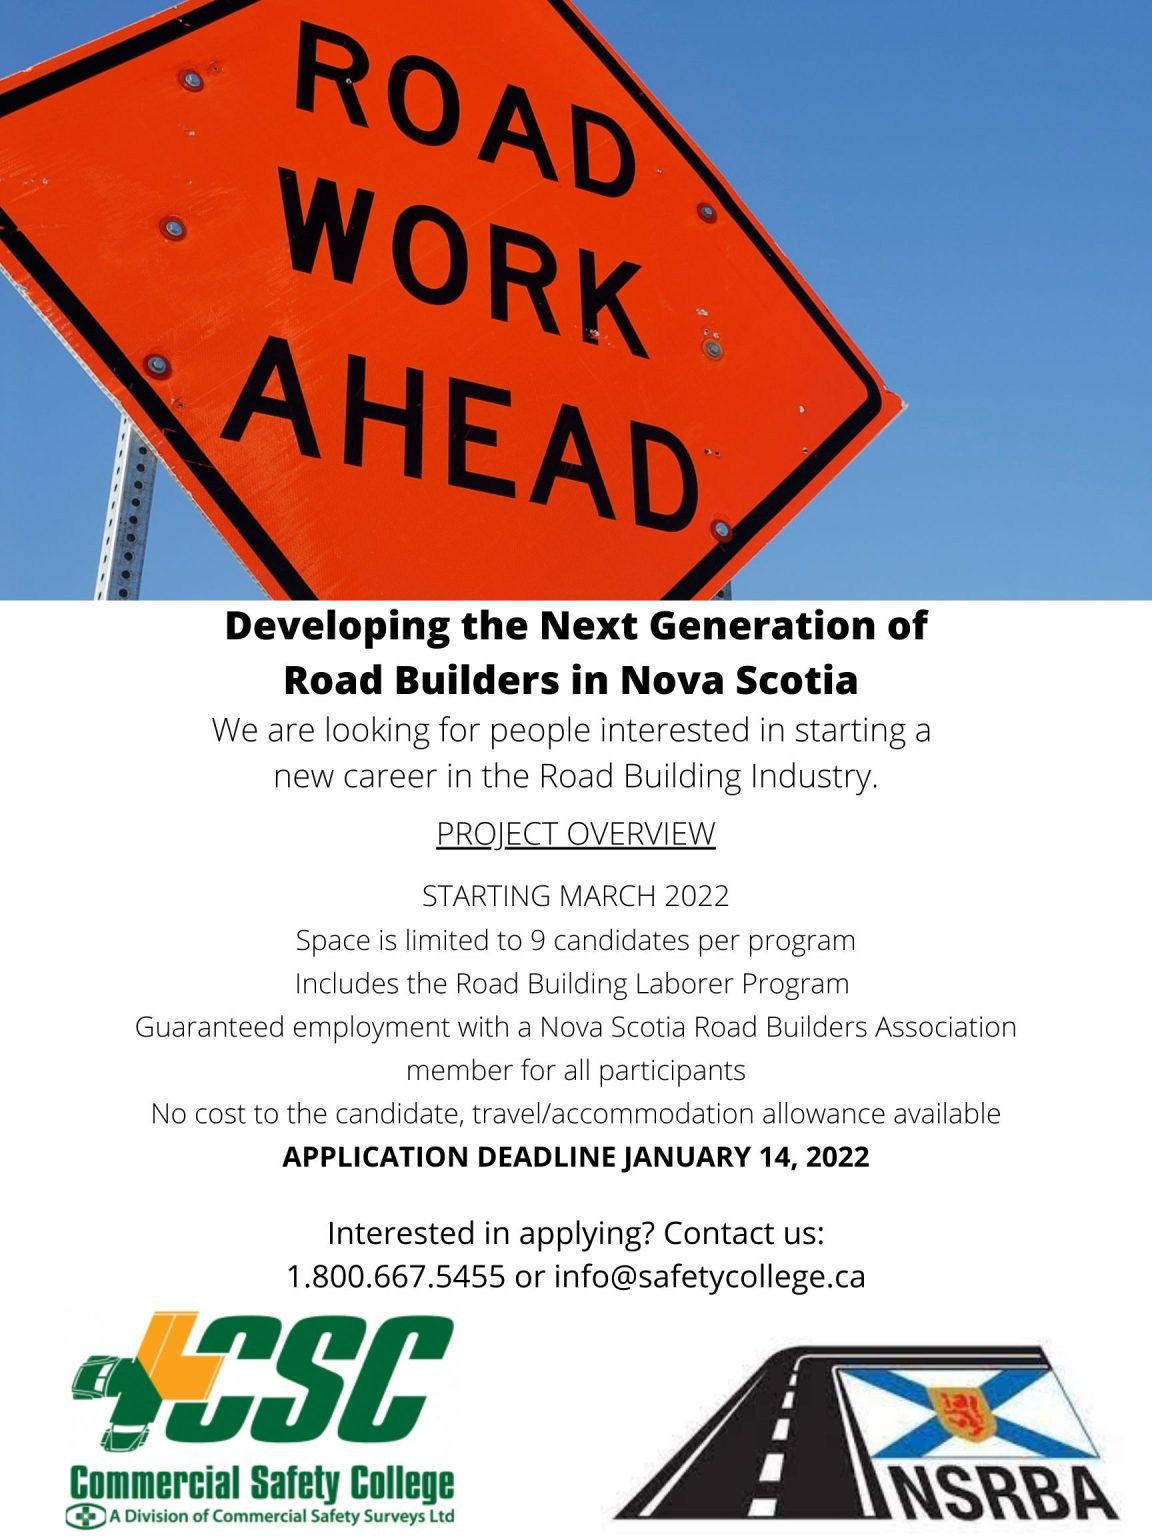 Developing the Next Generation of Road Builders in Nova Scotia 2022